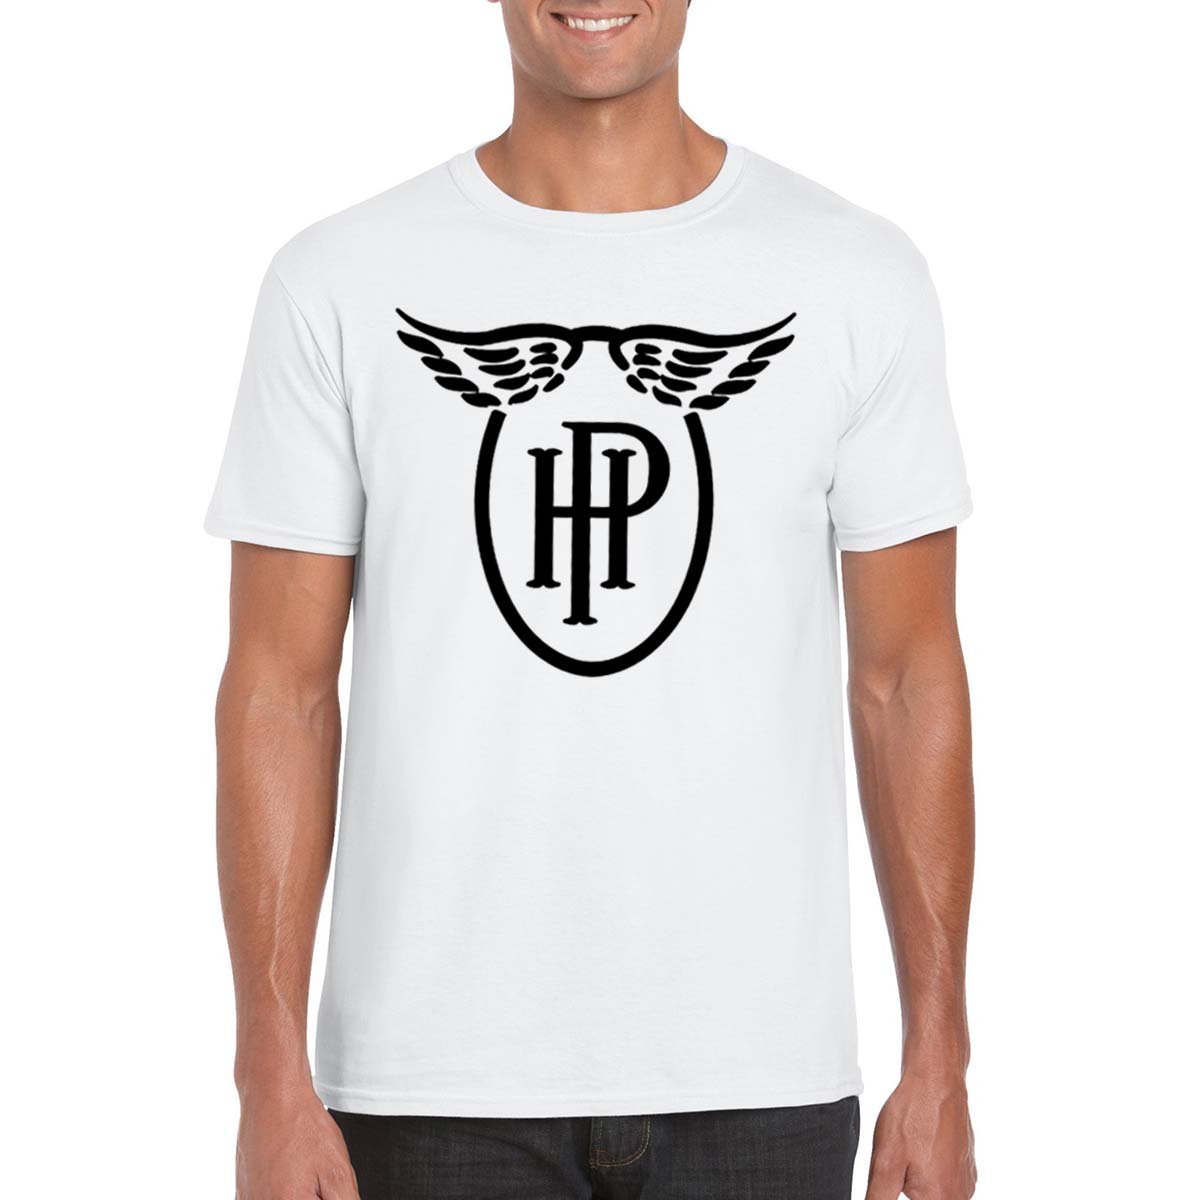 HANDLEY PAGE Vintage Aviation T-Shirt